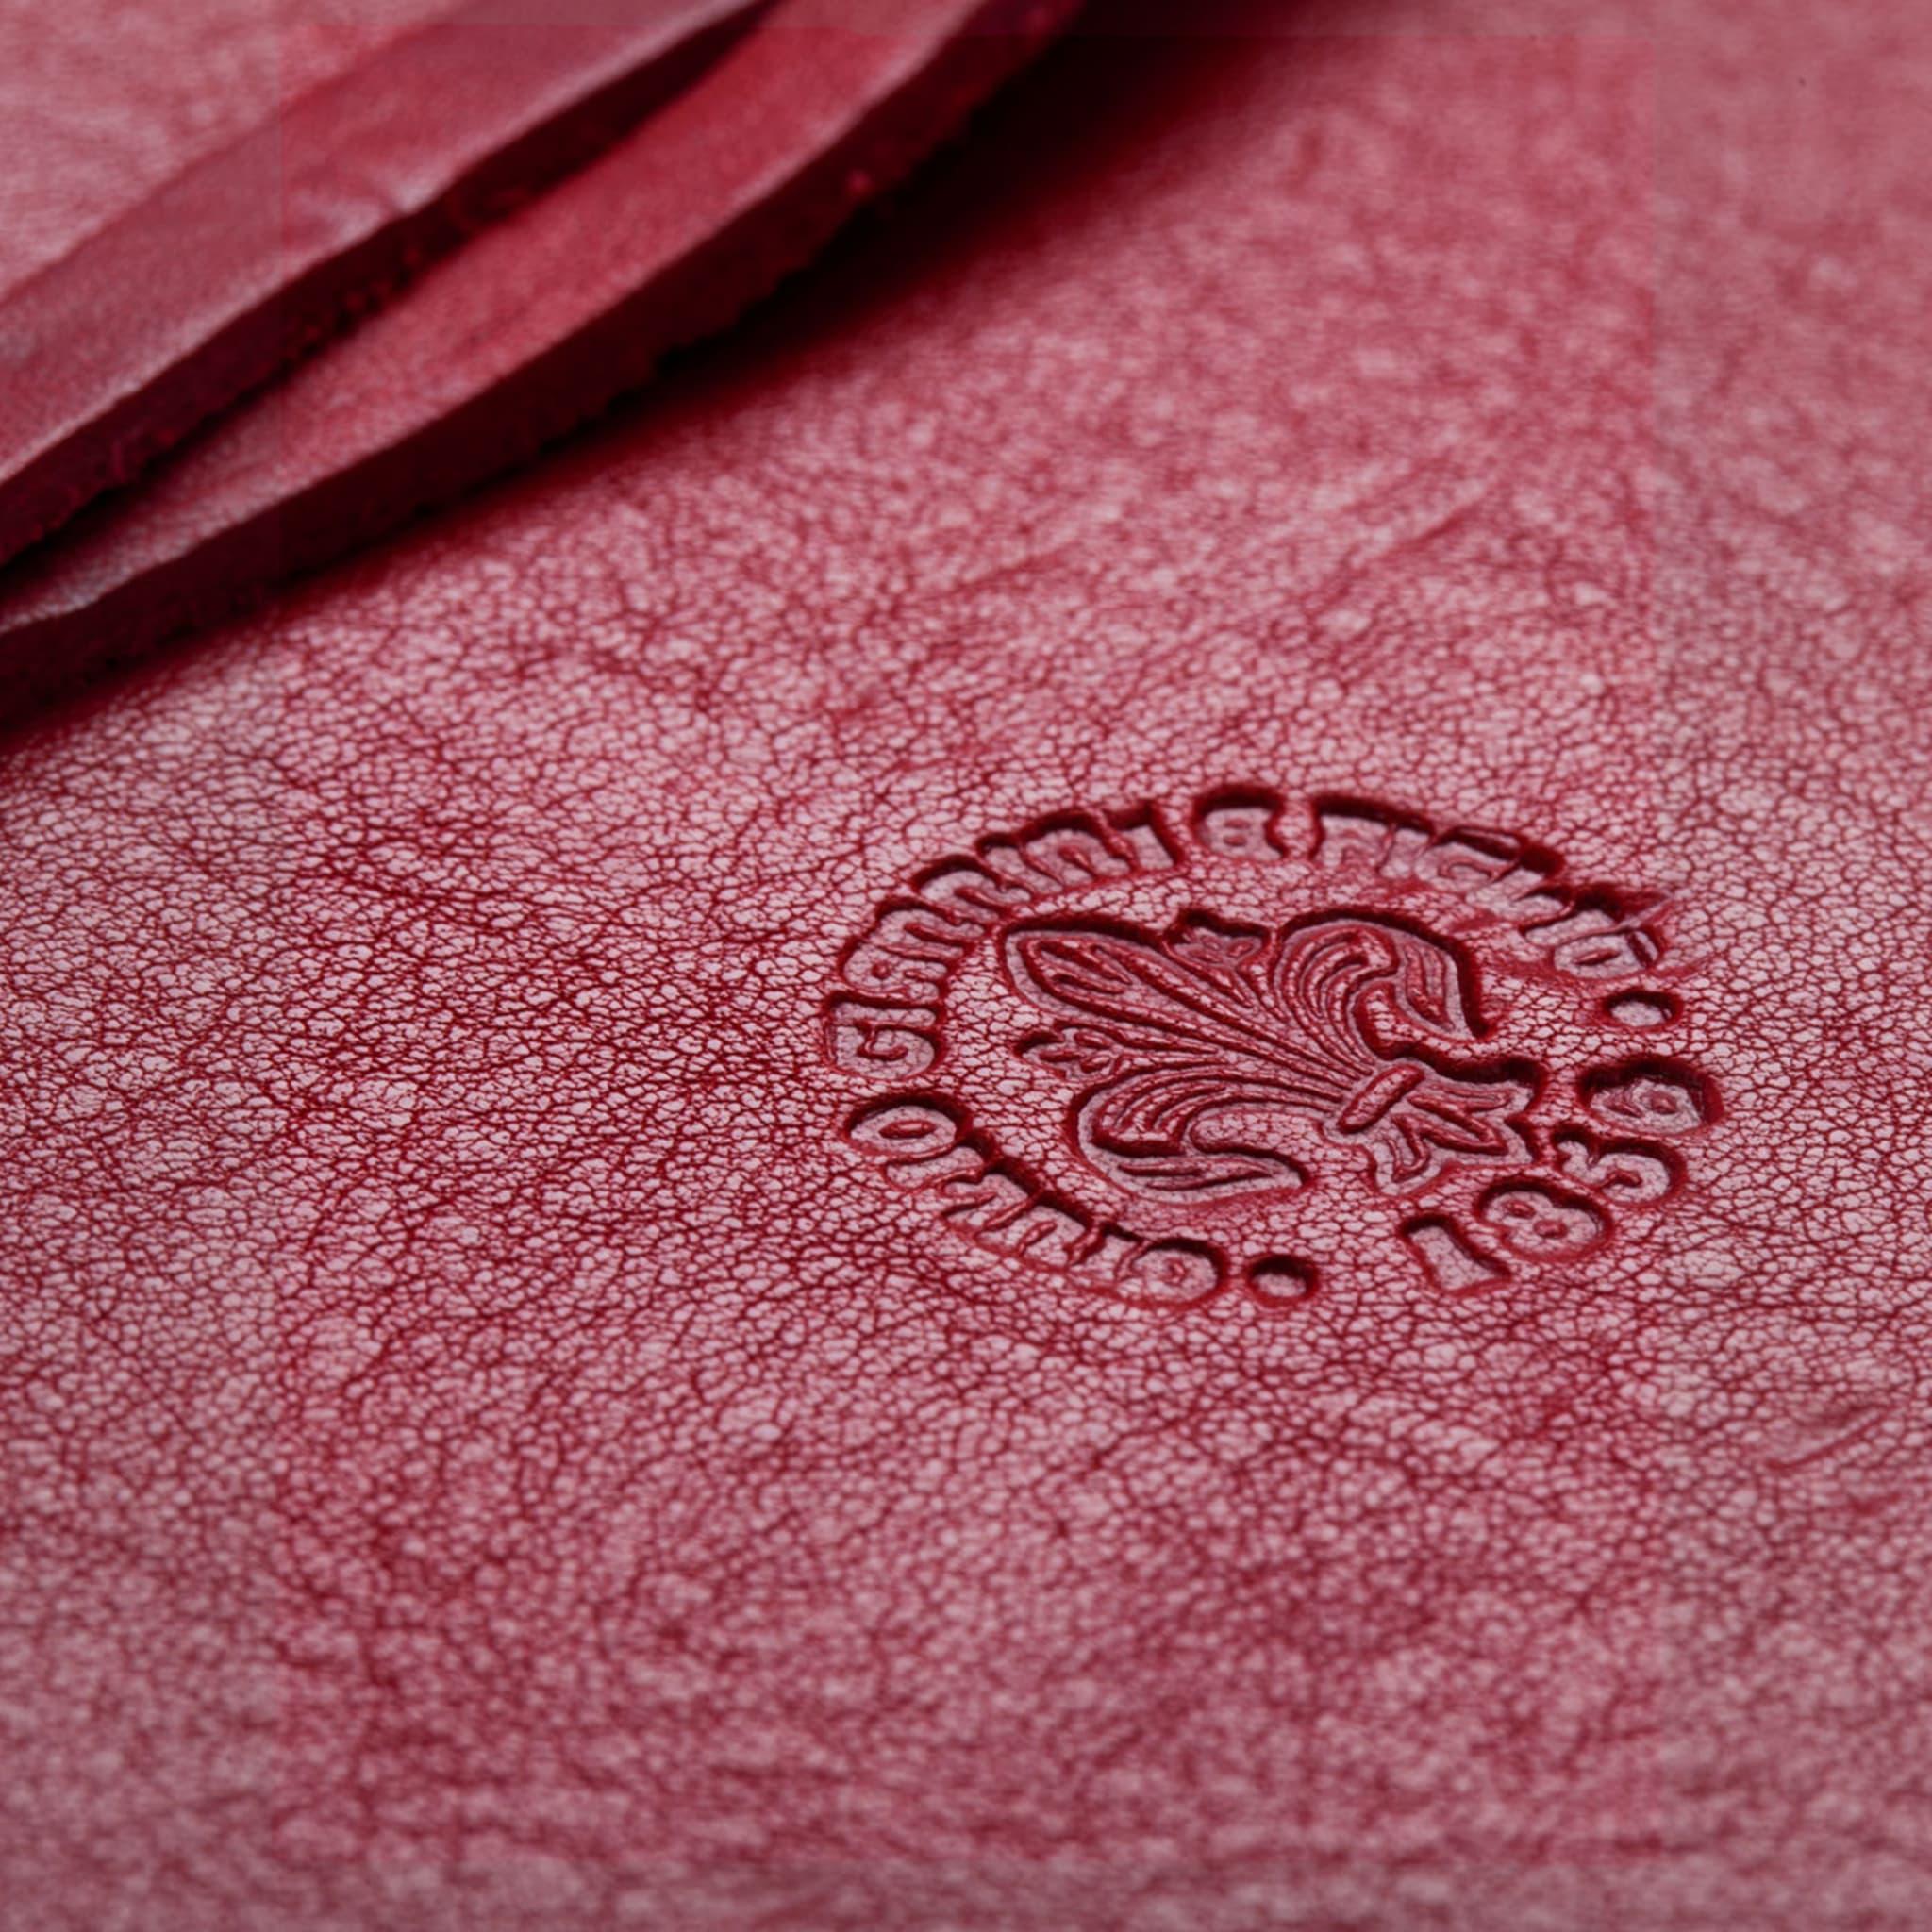 Italian Lace Red Leather Notebook For Sale